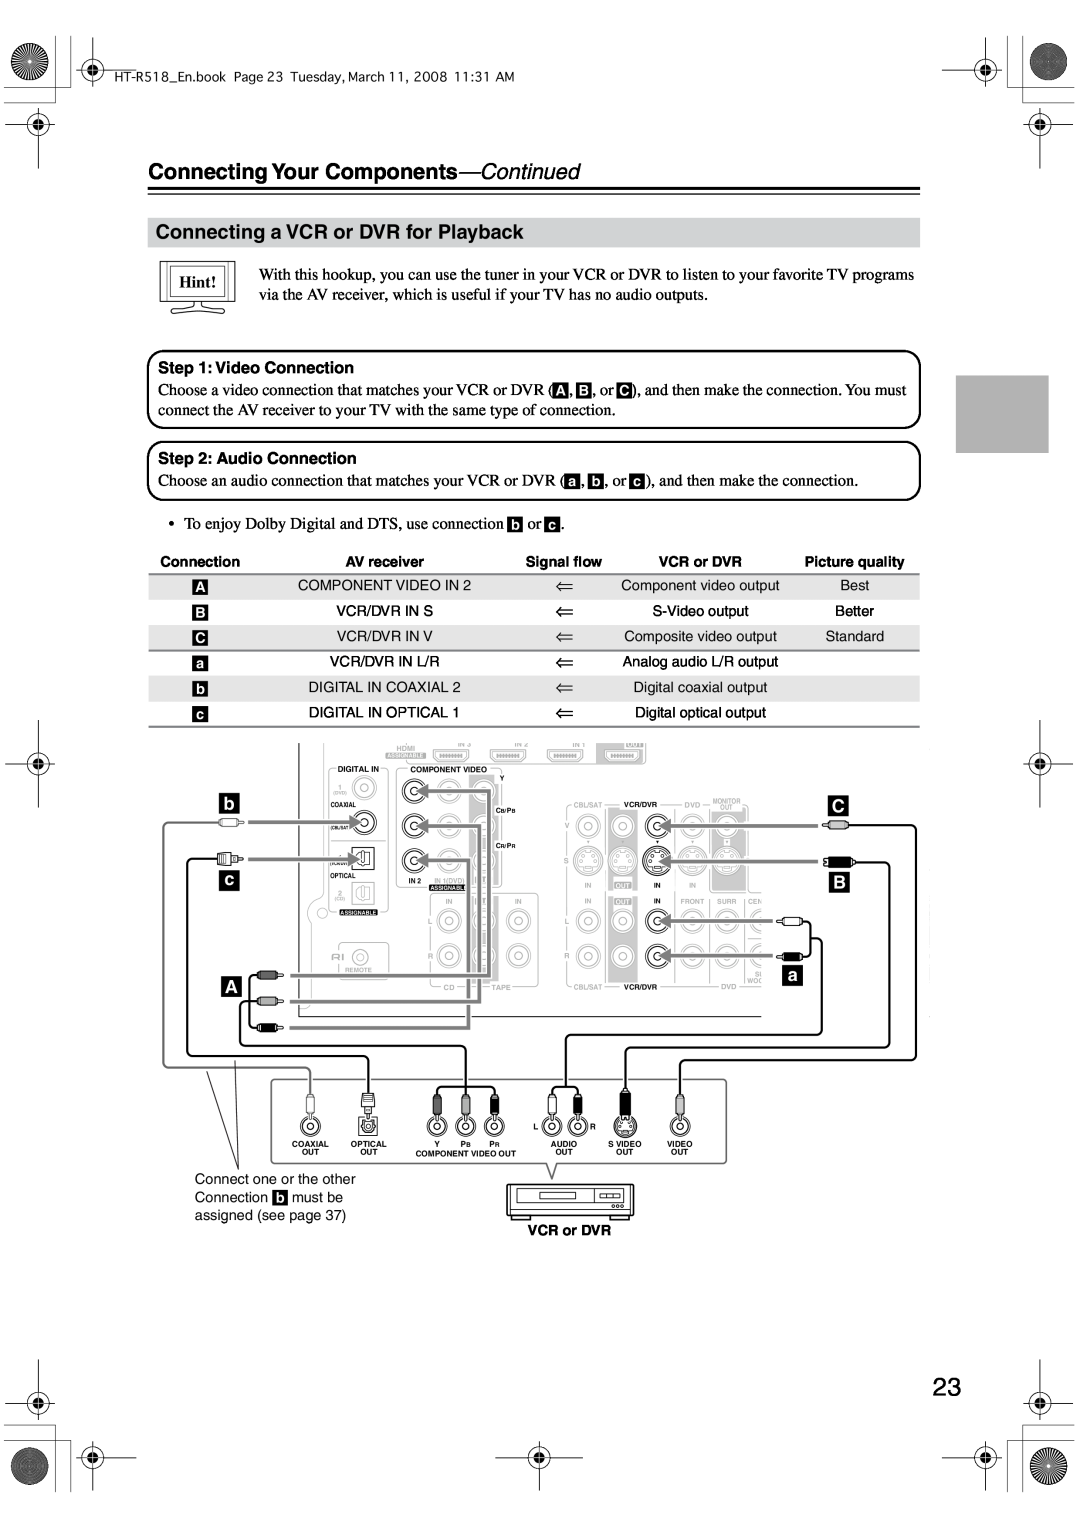 Onkyo HT-R518 instruction manual Connecting a VCR or DVR for Playback, Connecting Your Components-Continued, Hint 